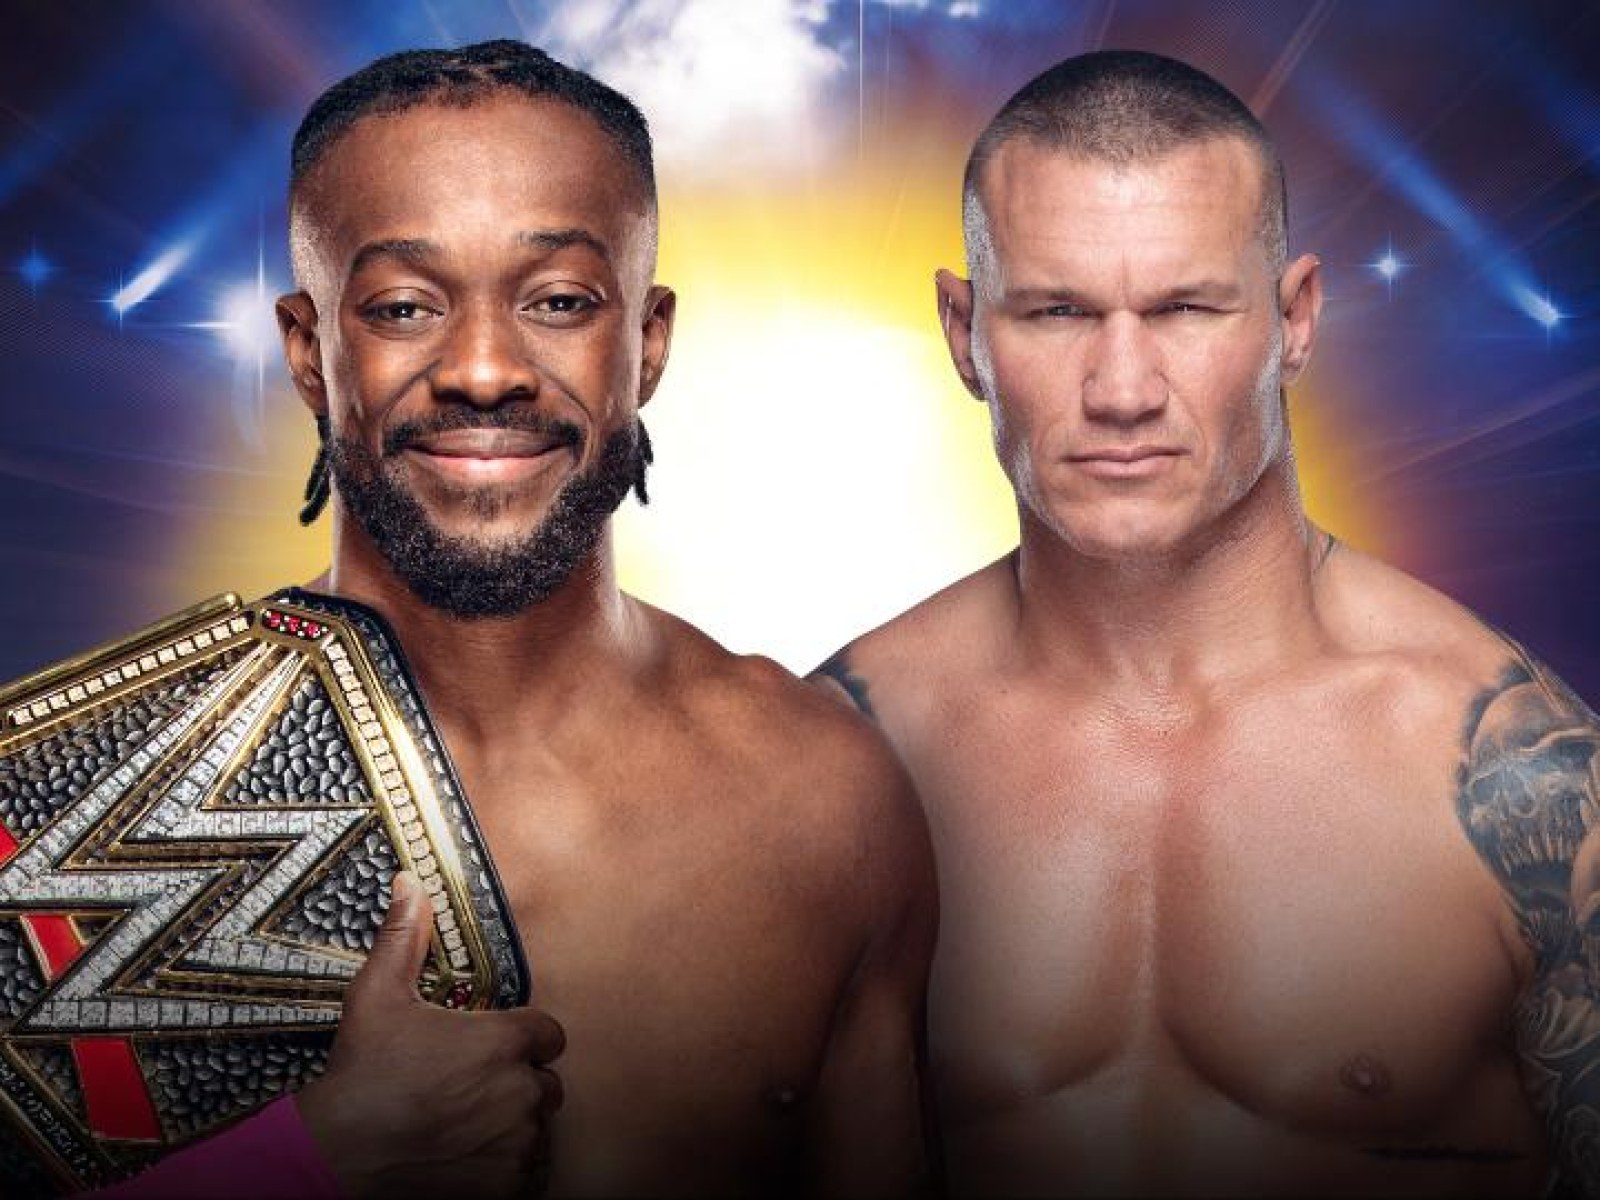 Wwe Clash Of Champions 2019 Predictions Our Picks For This Sunday